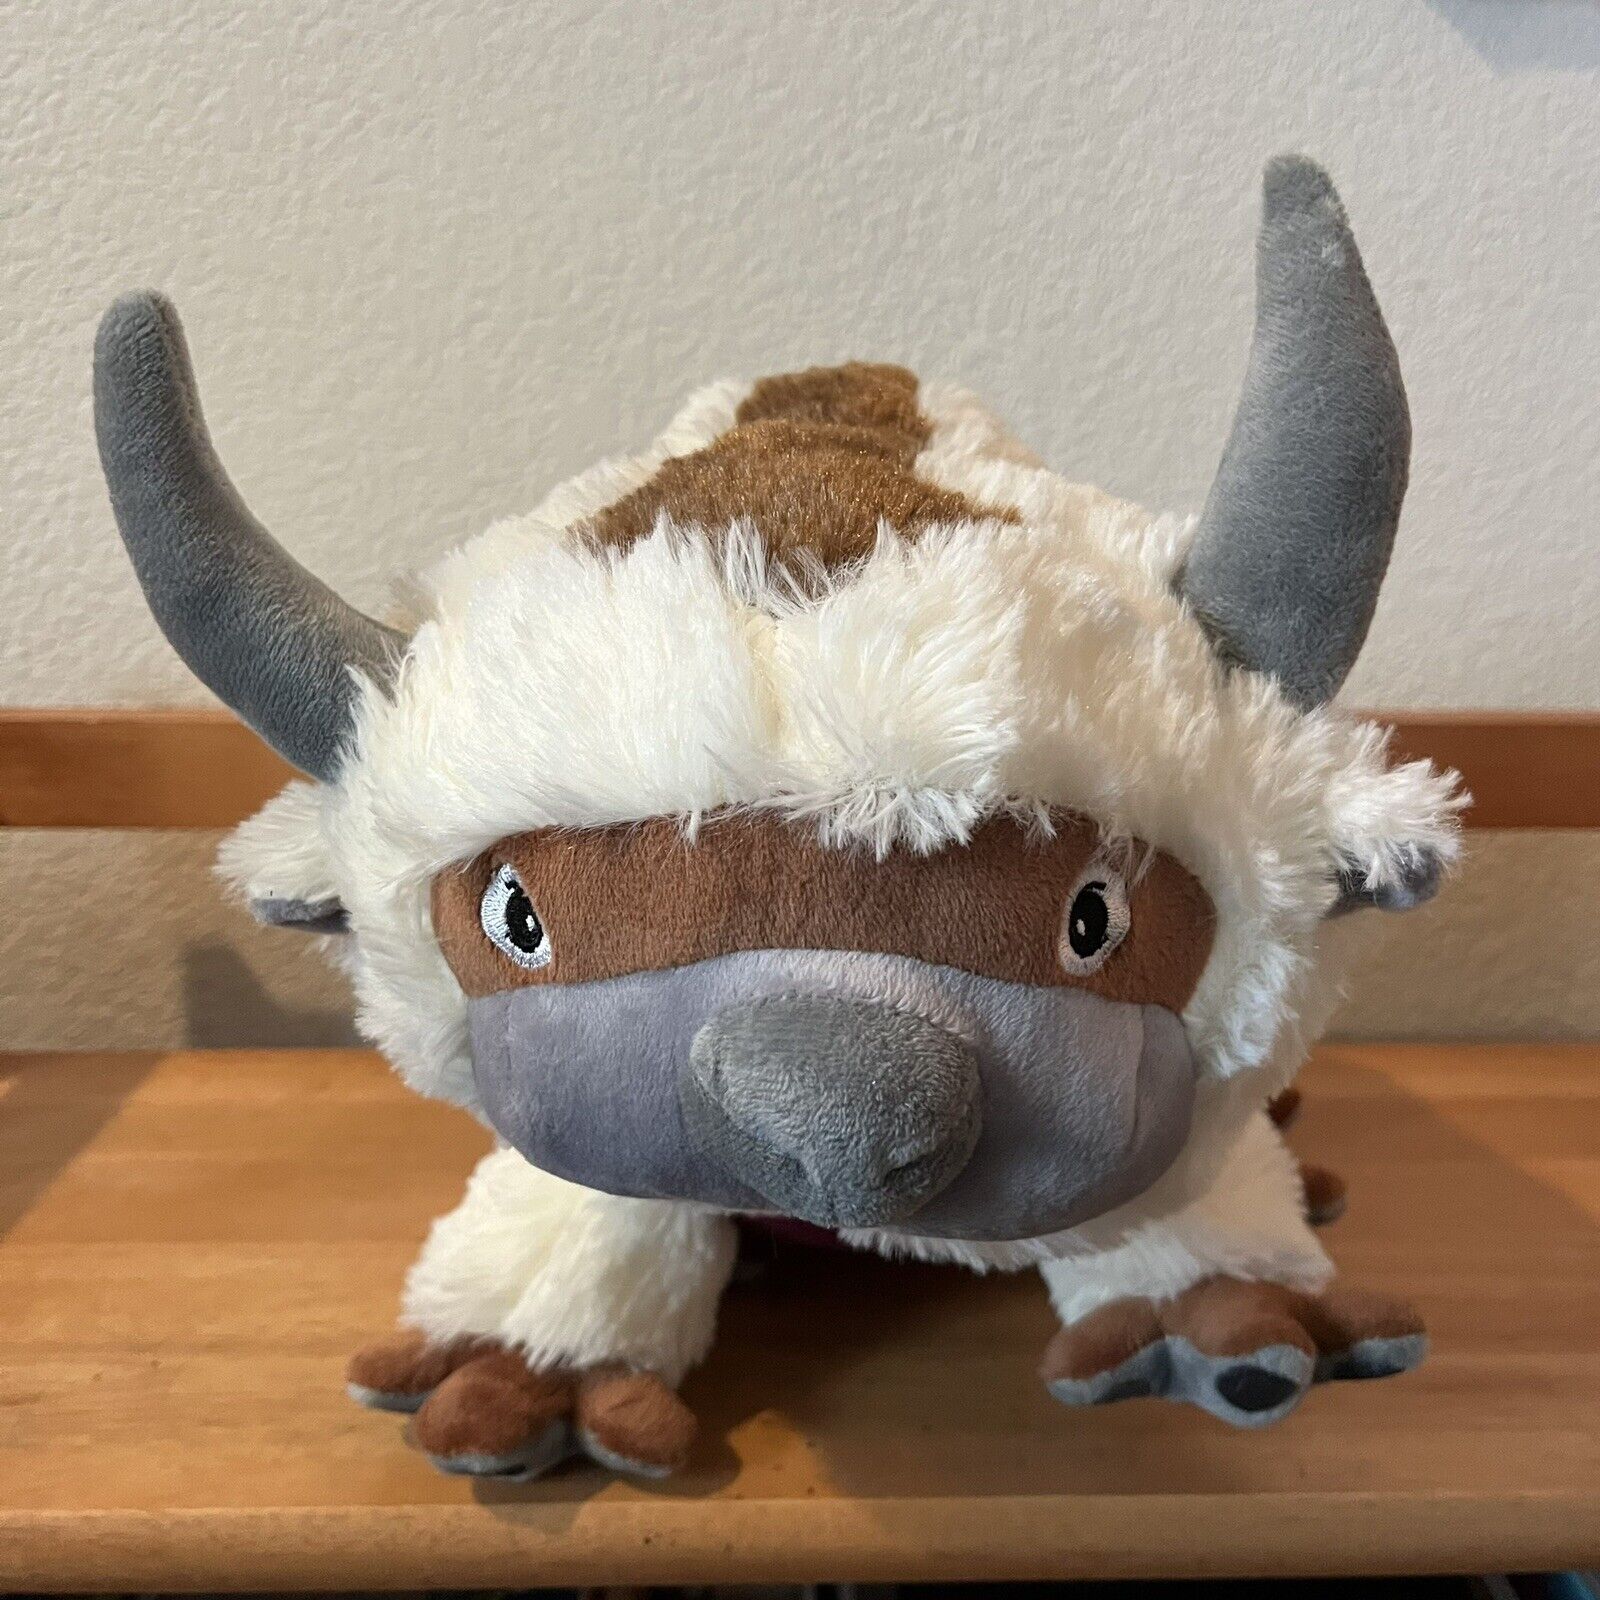 Avatar the Last Airbender APPA 18" Flying Bison Stuffed Animal Plush Toy Doll